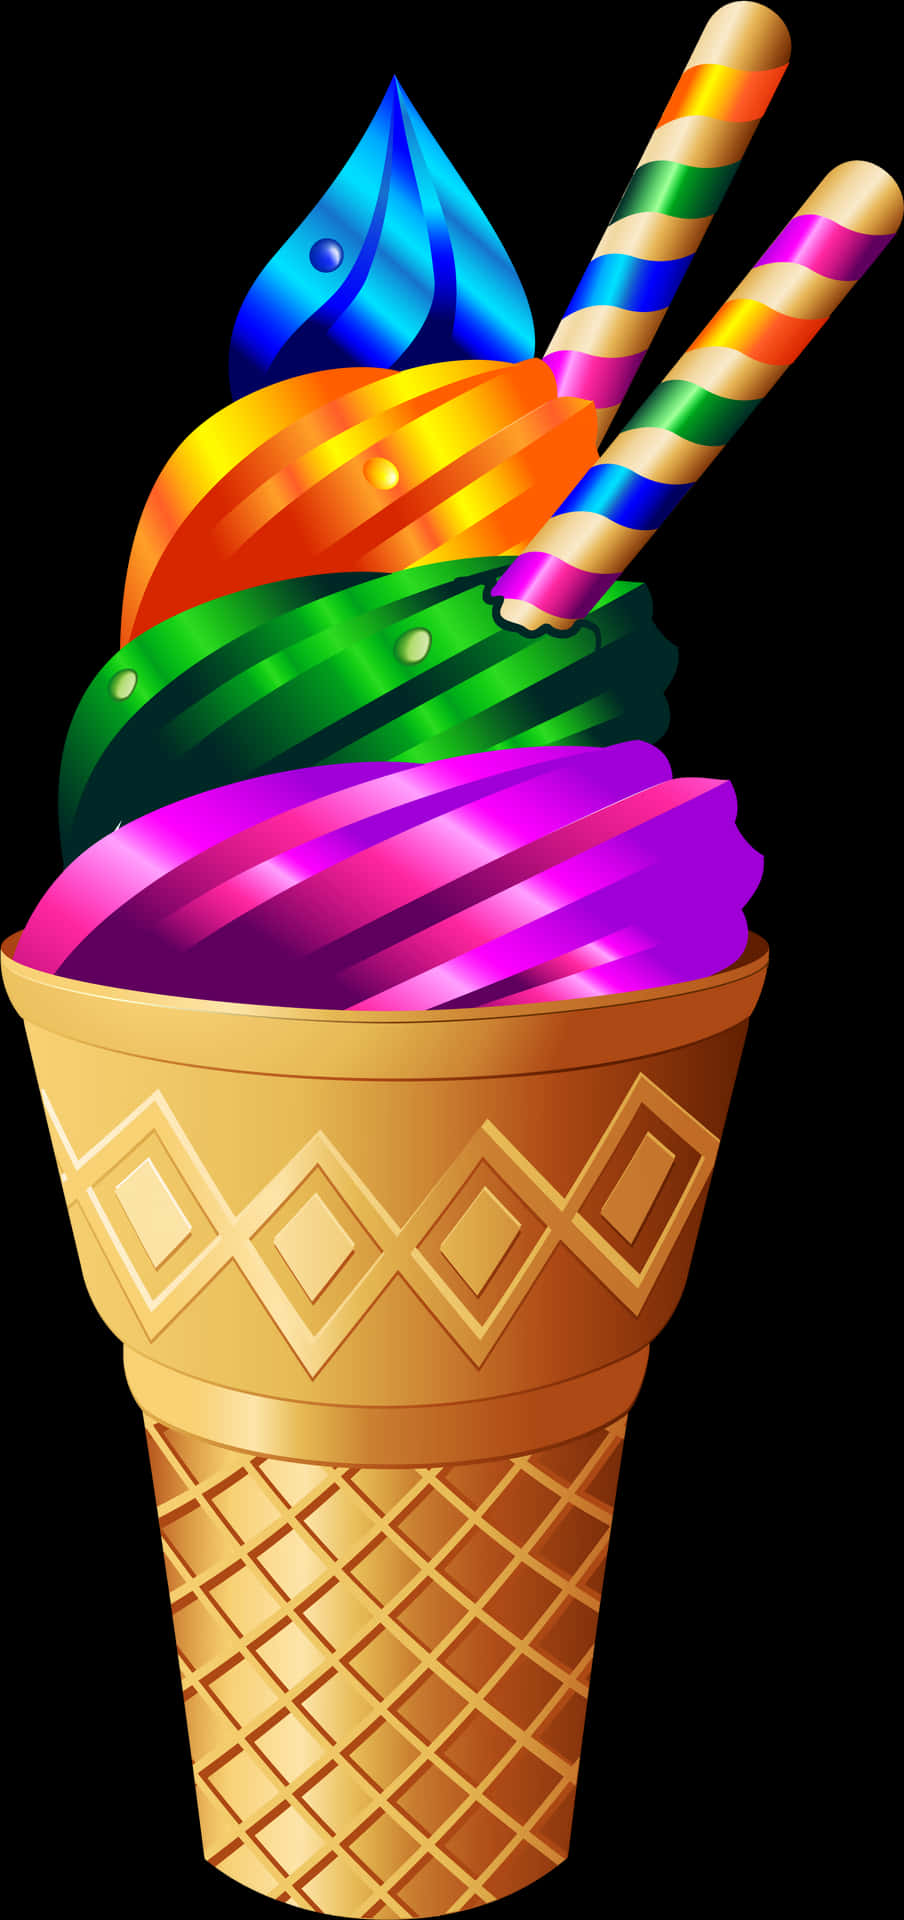 Colorful Rainbow Ice Cream Cone PNG